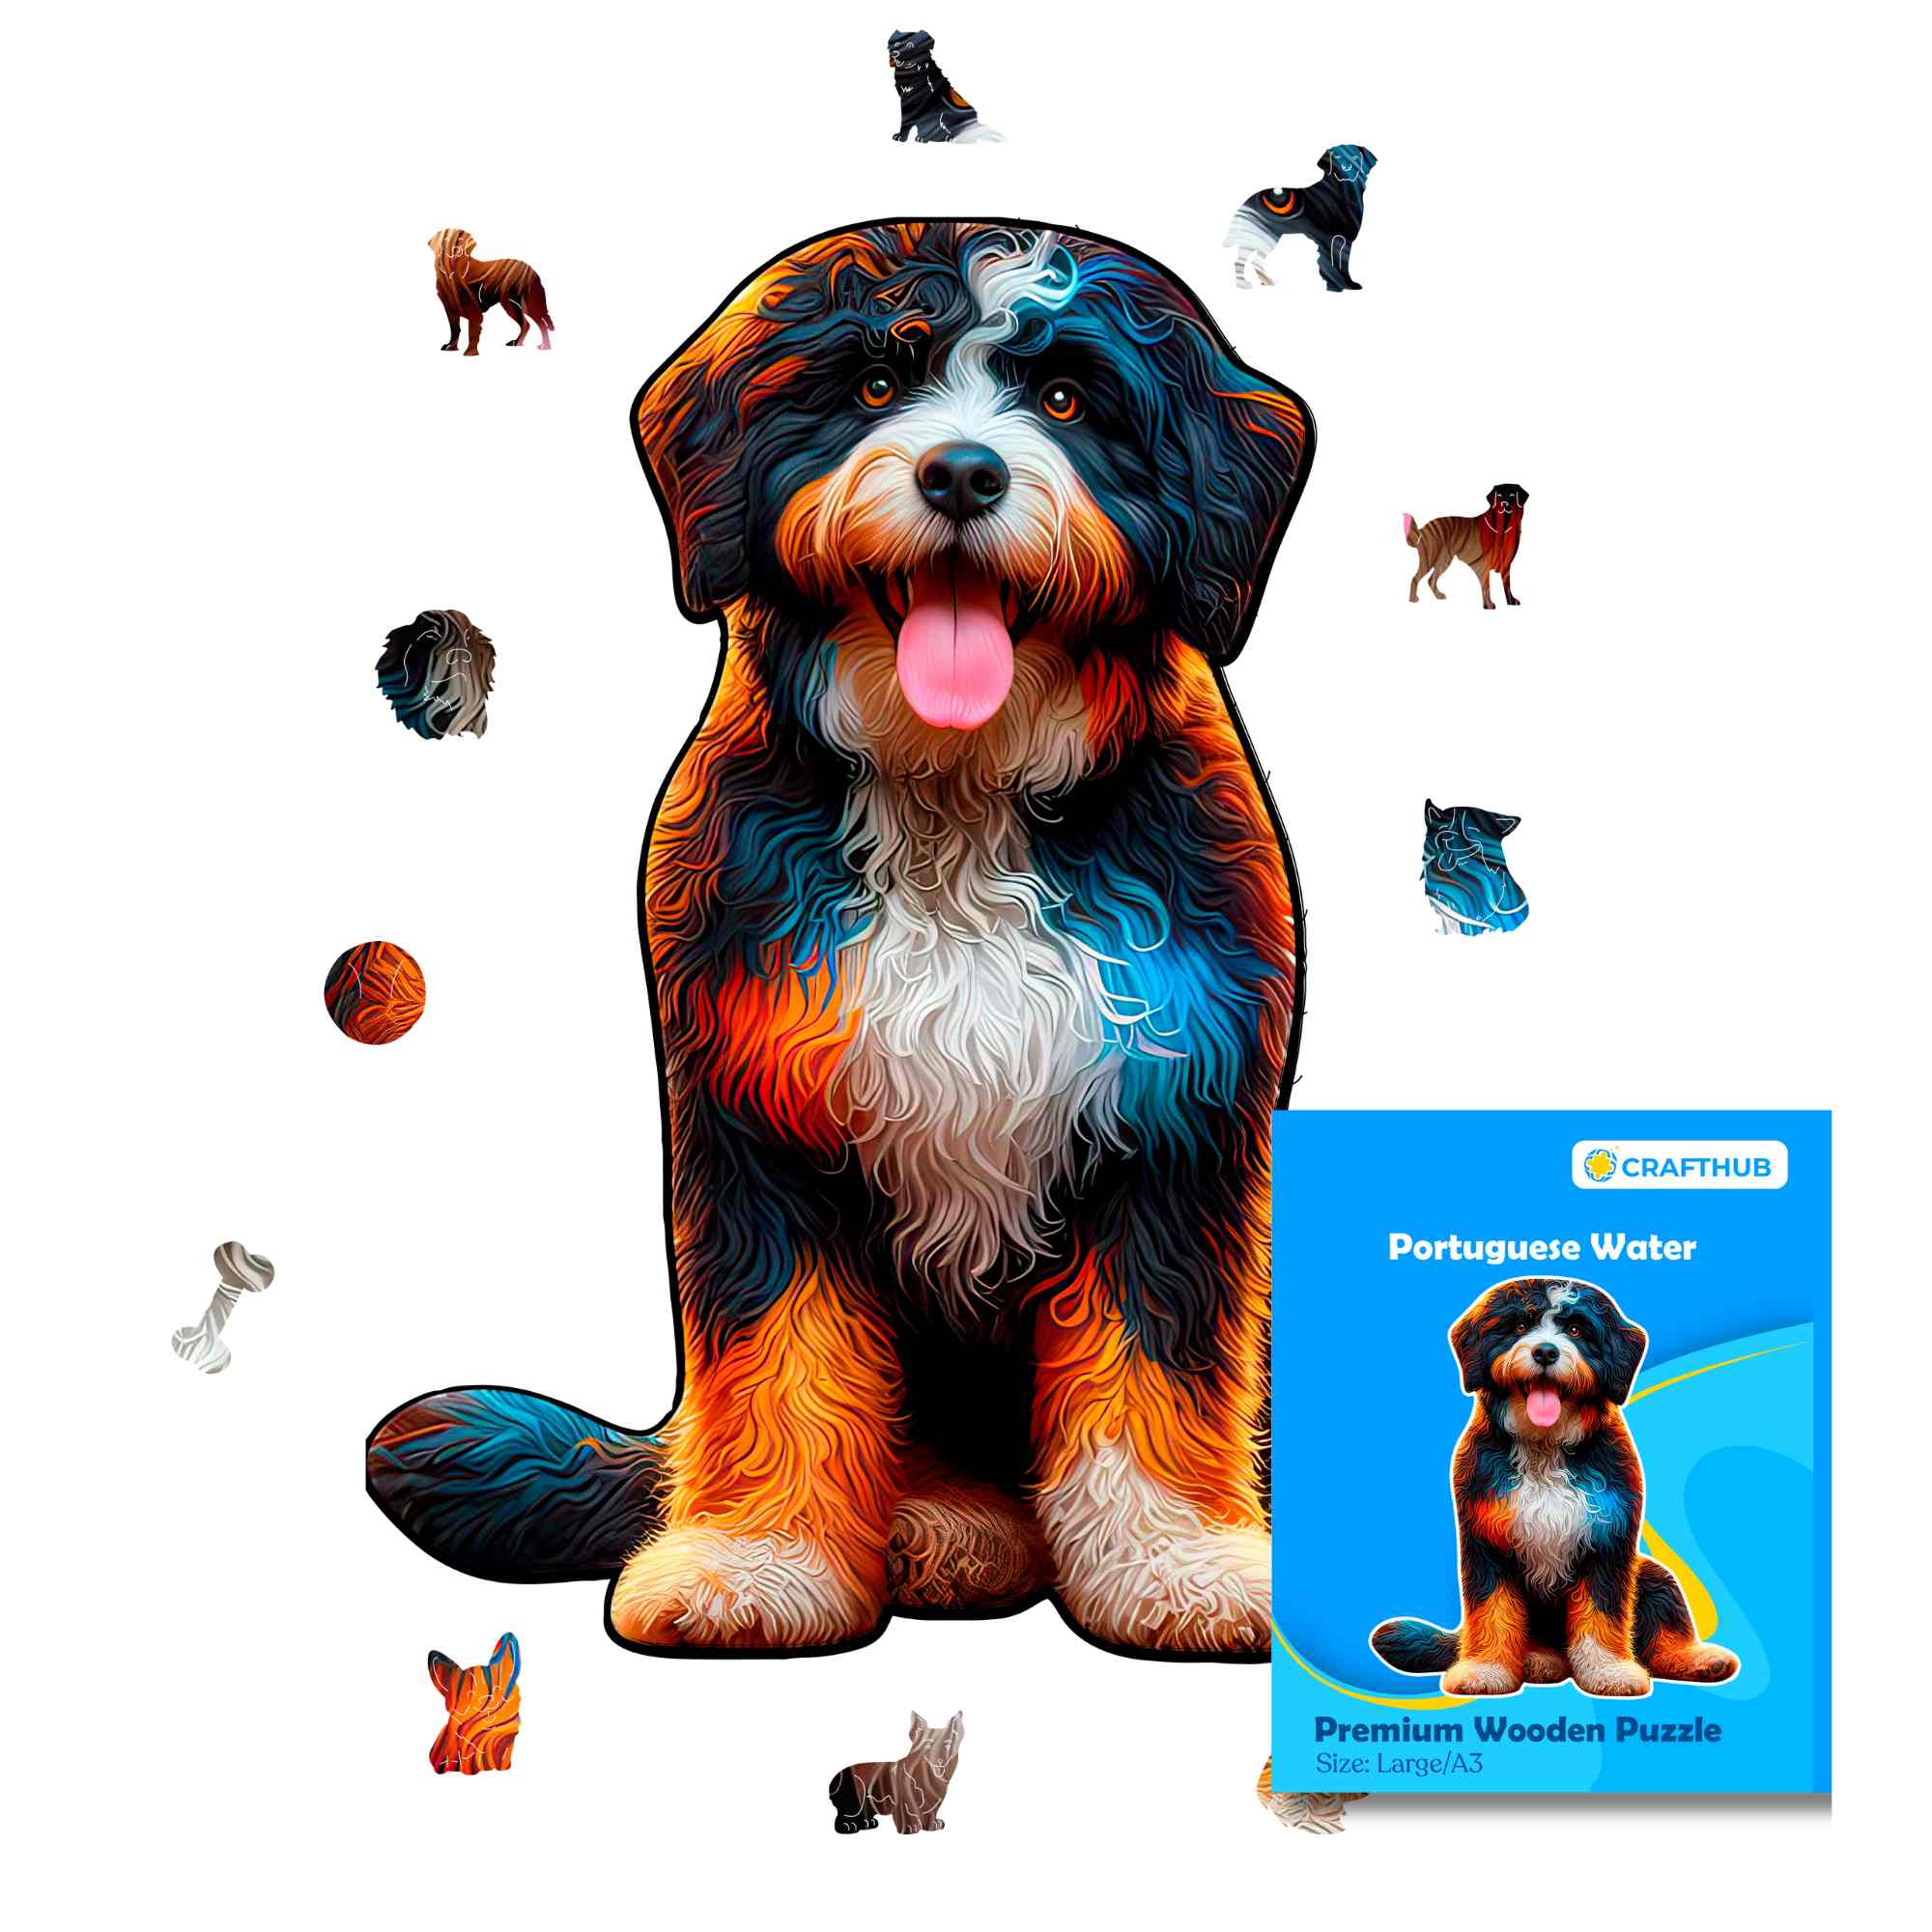 Animal Jigsaw Puzzle > Wooden Jigsaw Puzzle > Jigsaw Puzzle A4 Portuguese Water Dog - Jigsaw Puzzle